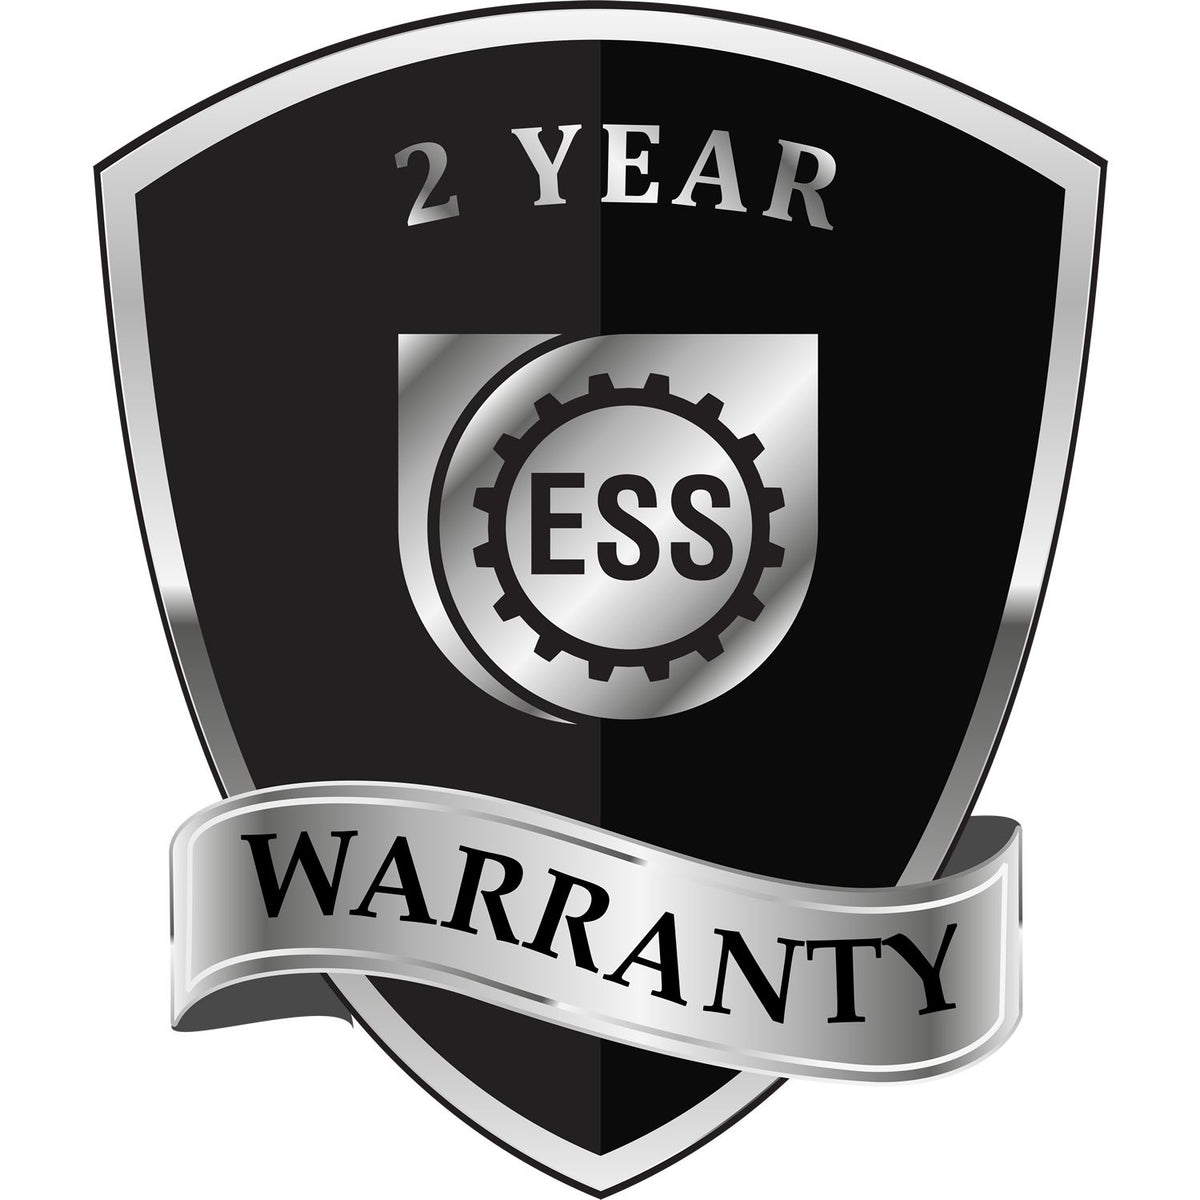 A black and silver badge or emblem showing warranty information for the Gift Hawaii Geologist Seal